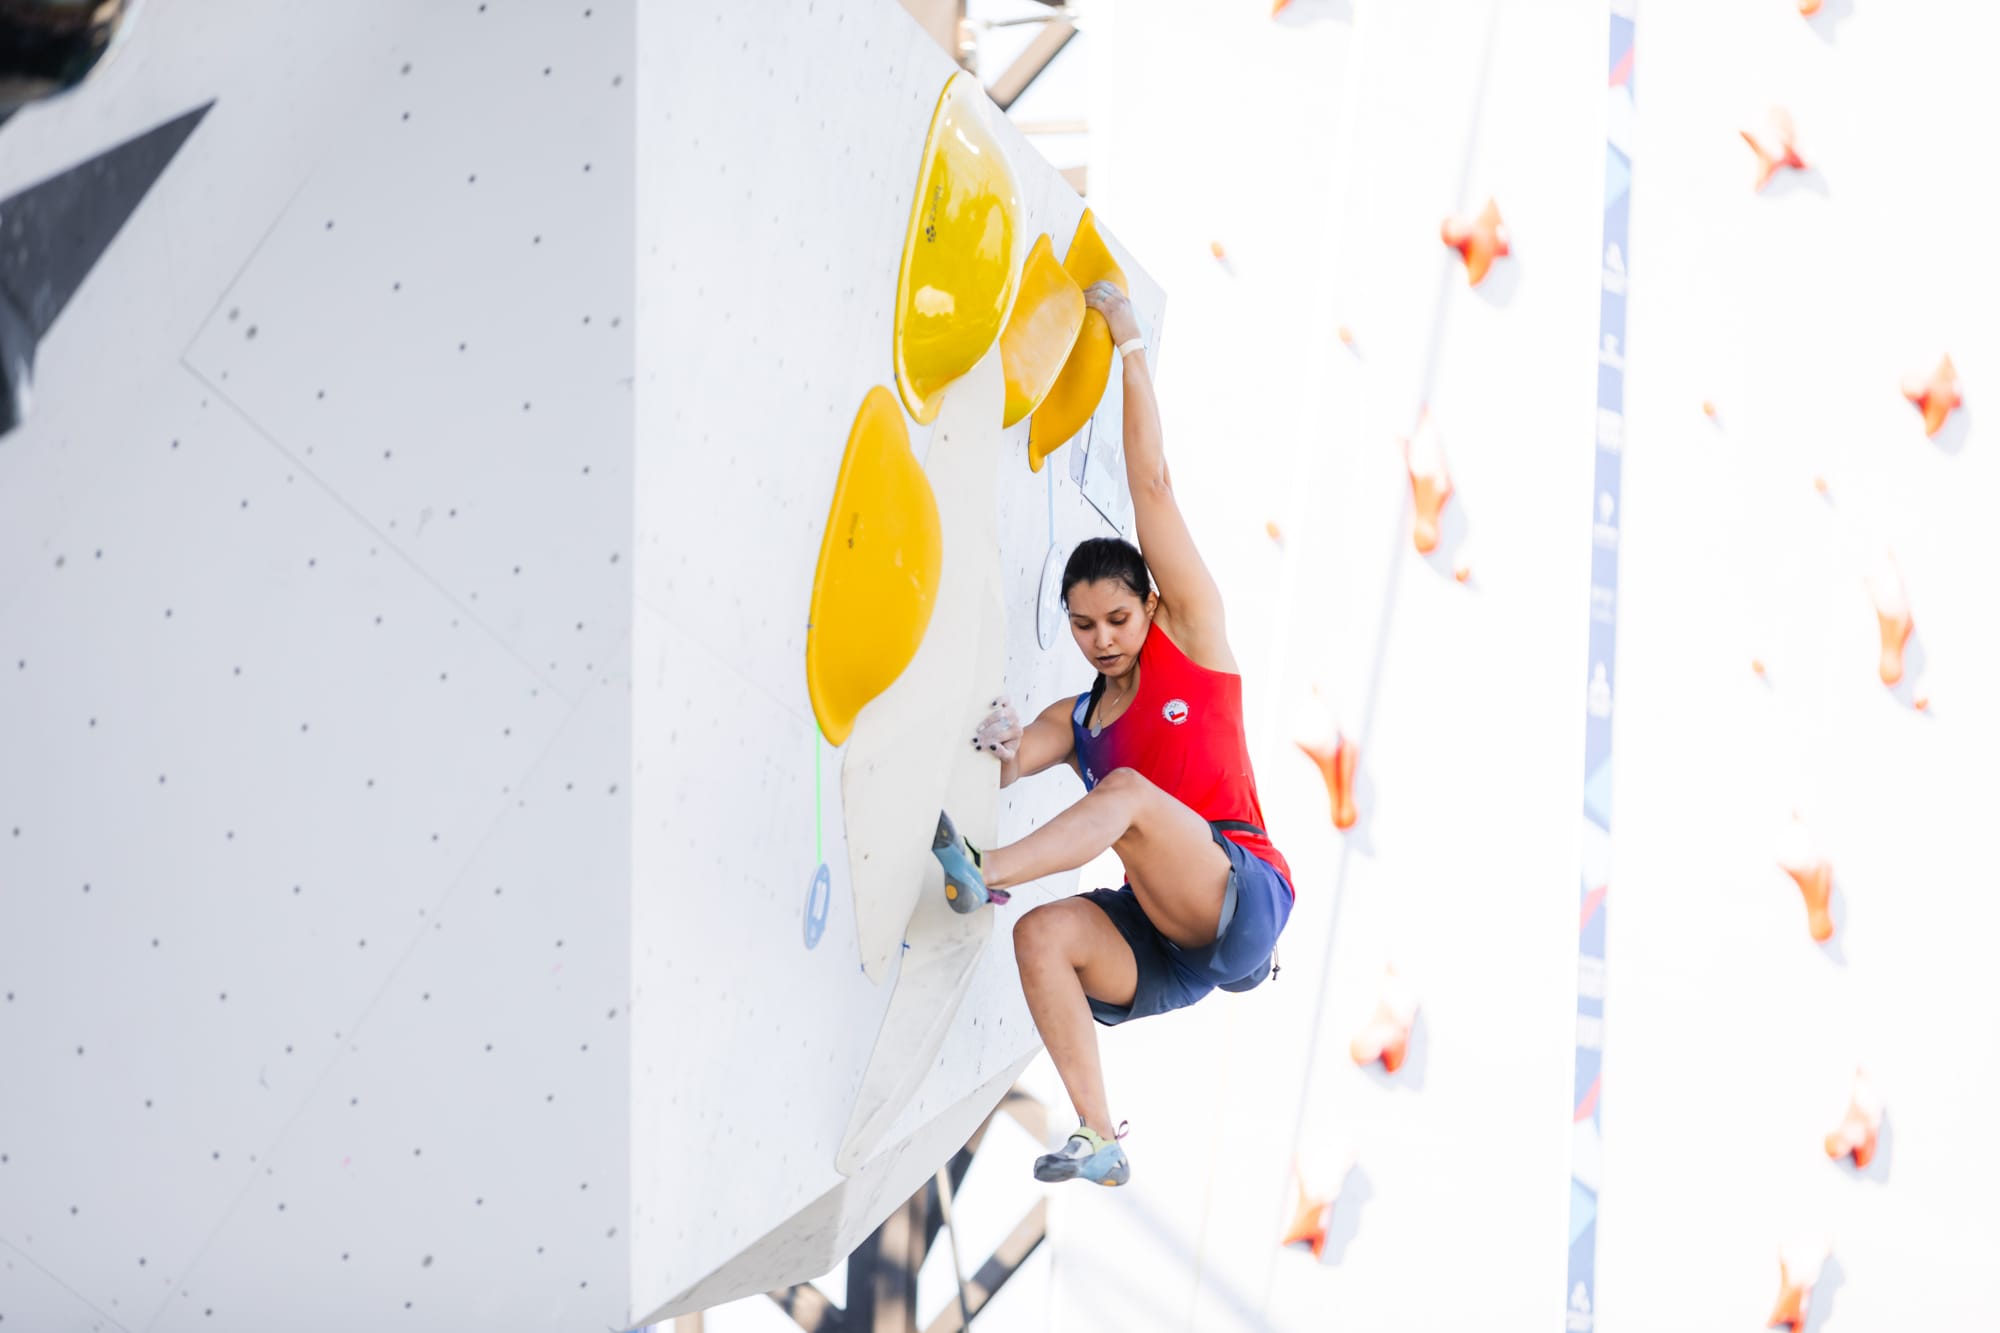 Alejandra Contreras topping out boulder 2 in the final